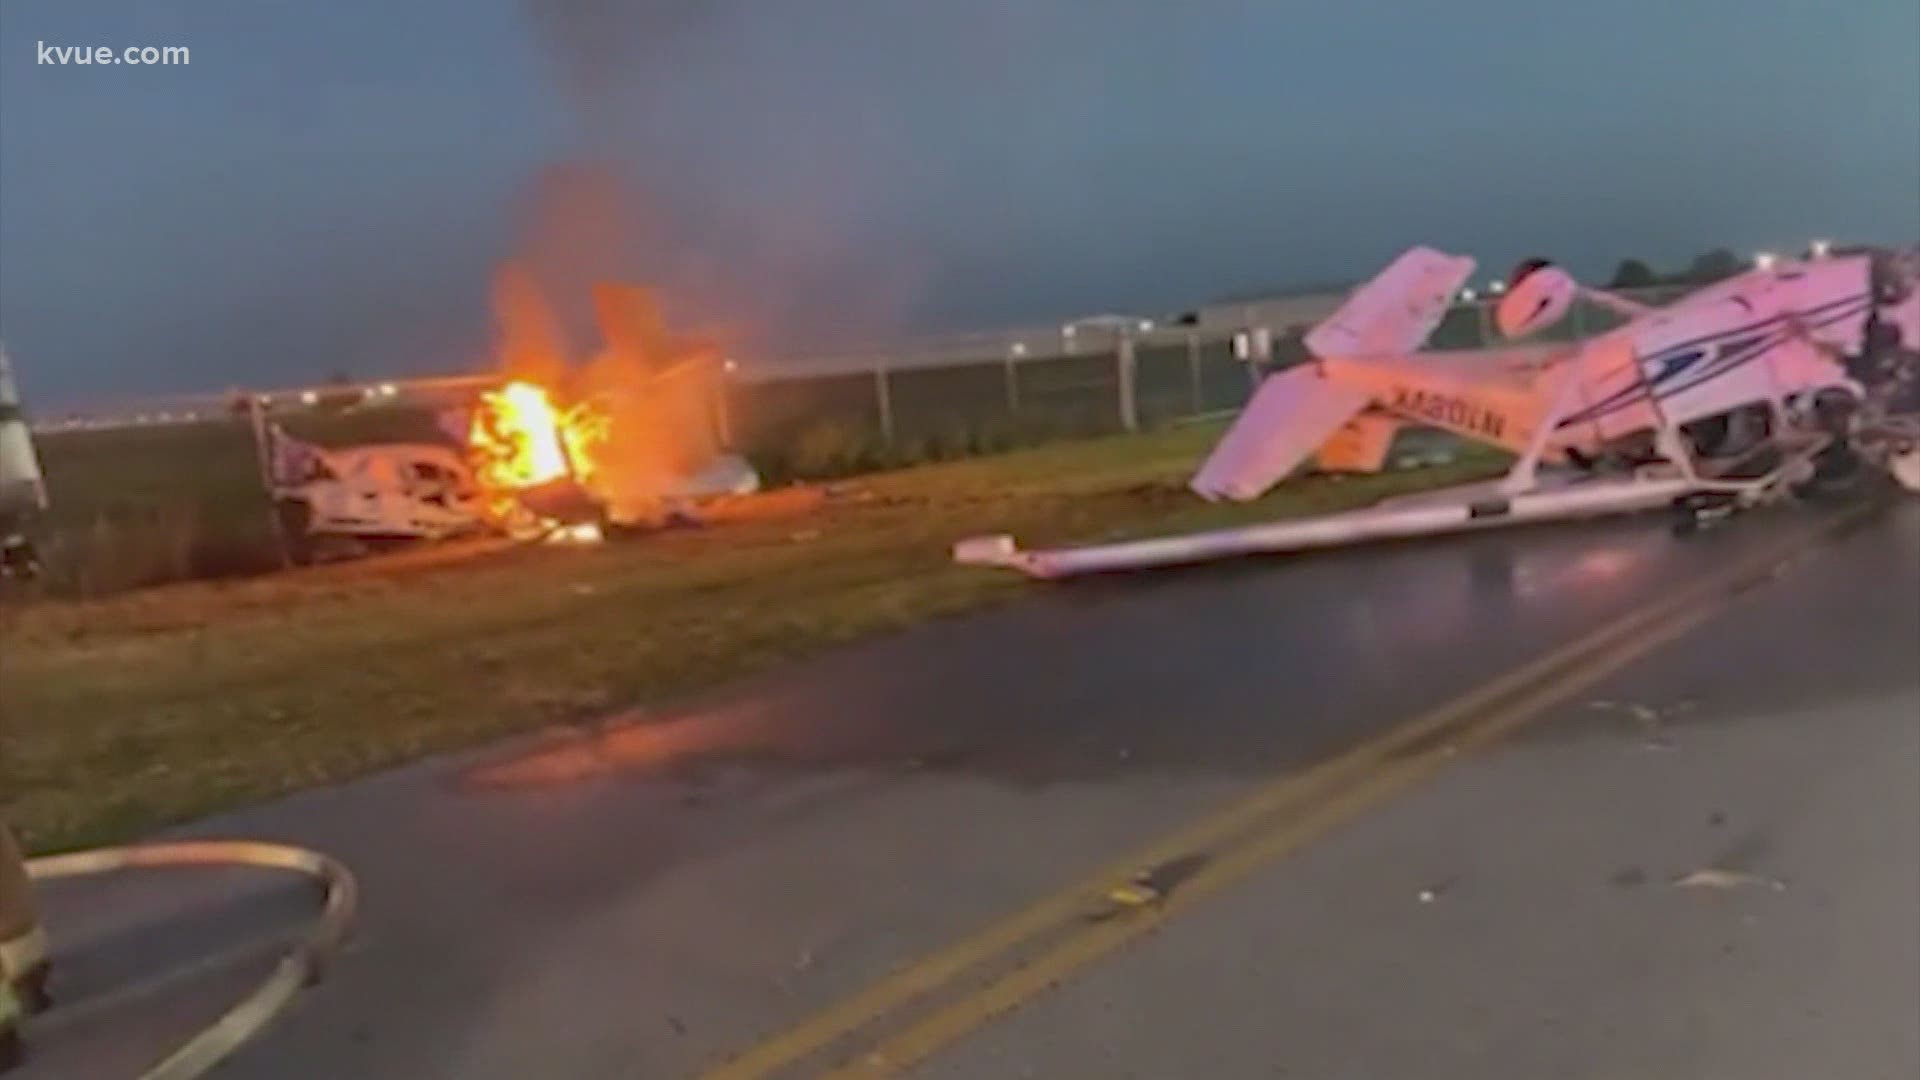 Three people were injured after two planes collided at San Marcos Regional Airport. A student and instructor were in one of the planes.